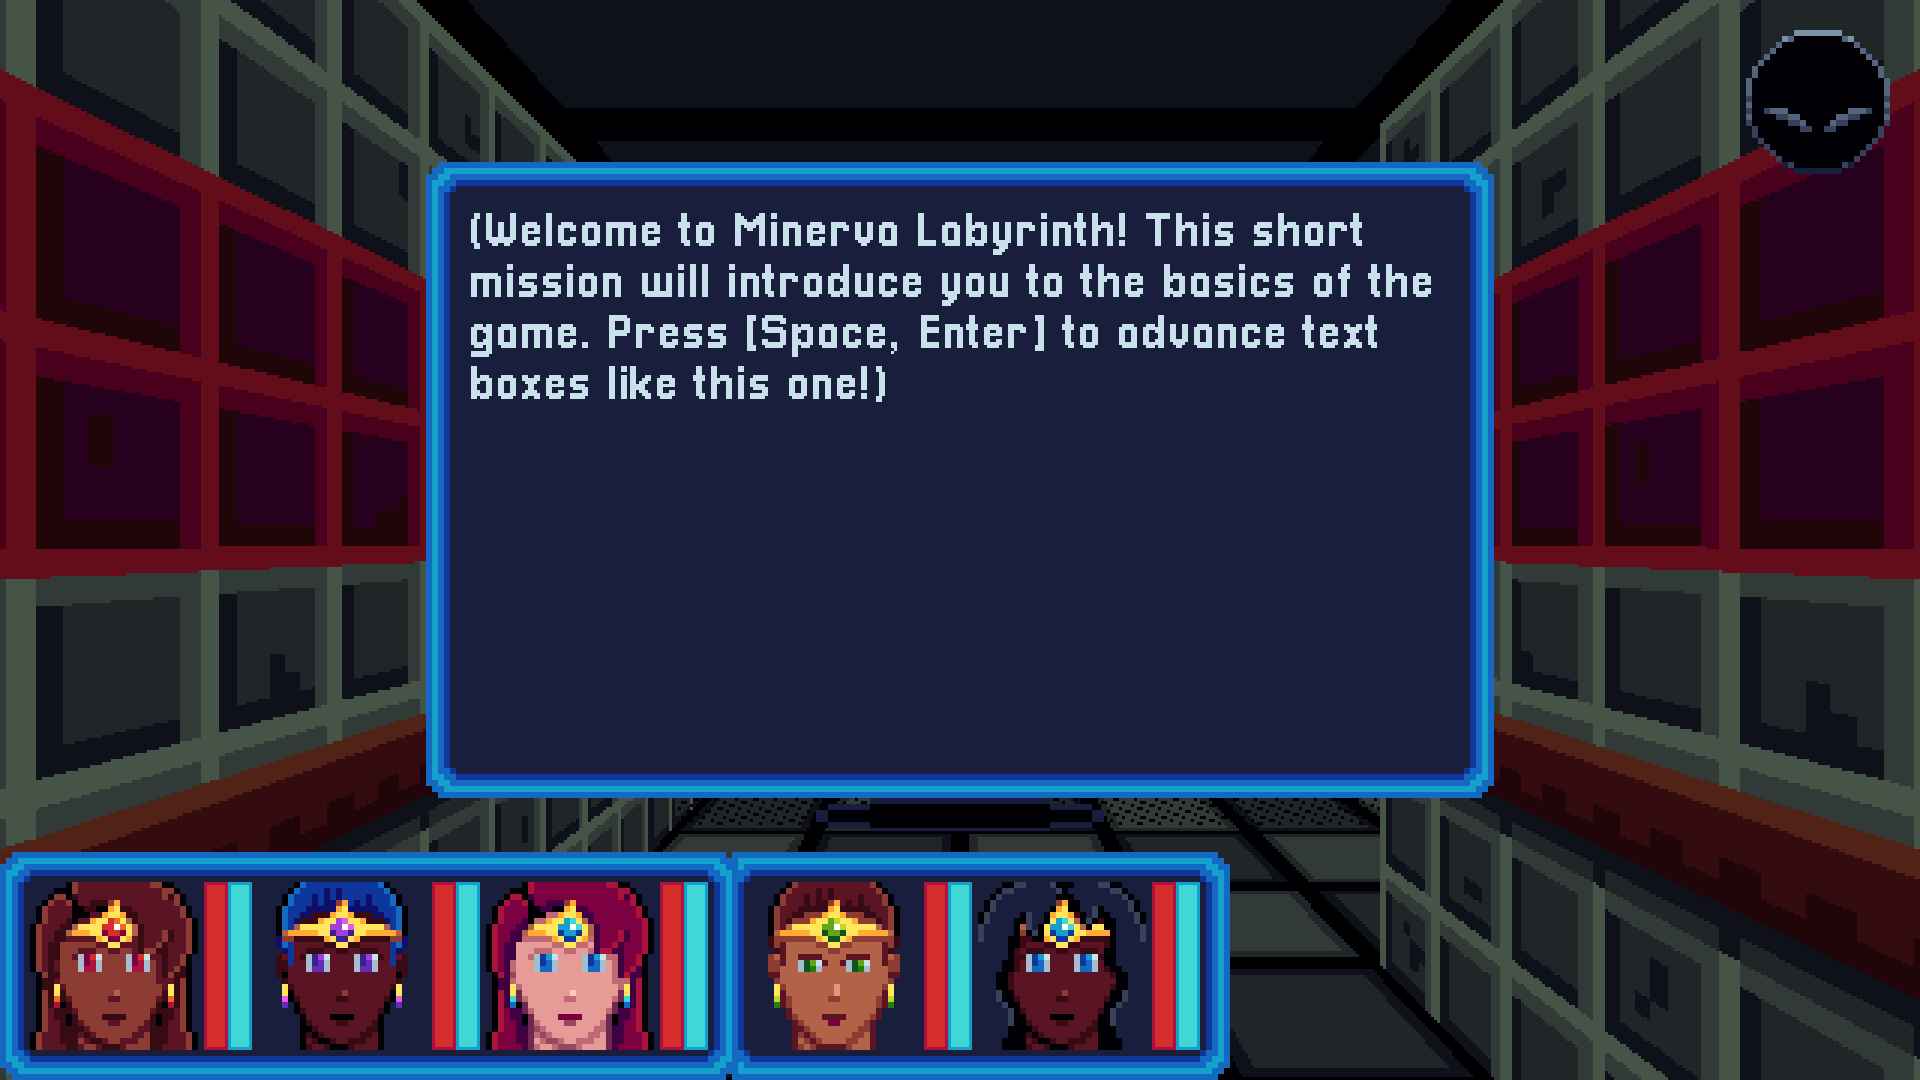 A dungeon view with a text box that reads "Welcome to Minerva Labyrinth! This short mission will introduce you to the basics of the game. Press Space, Enter to advance text boxes like this one!"  All of the text is a very light bluish-grey on a dark blue background.